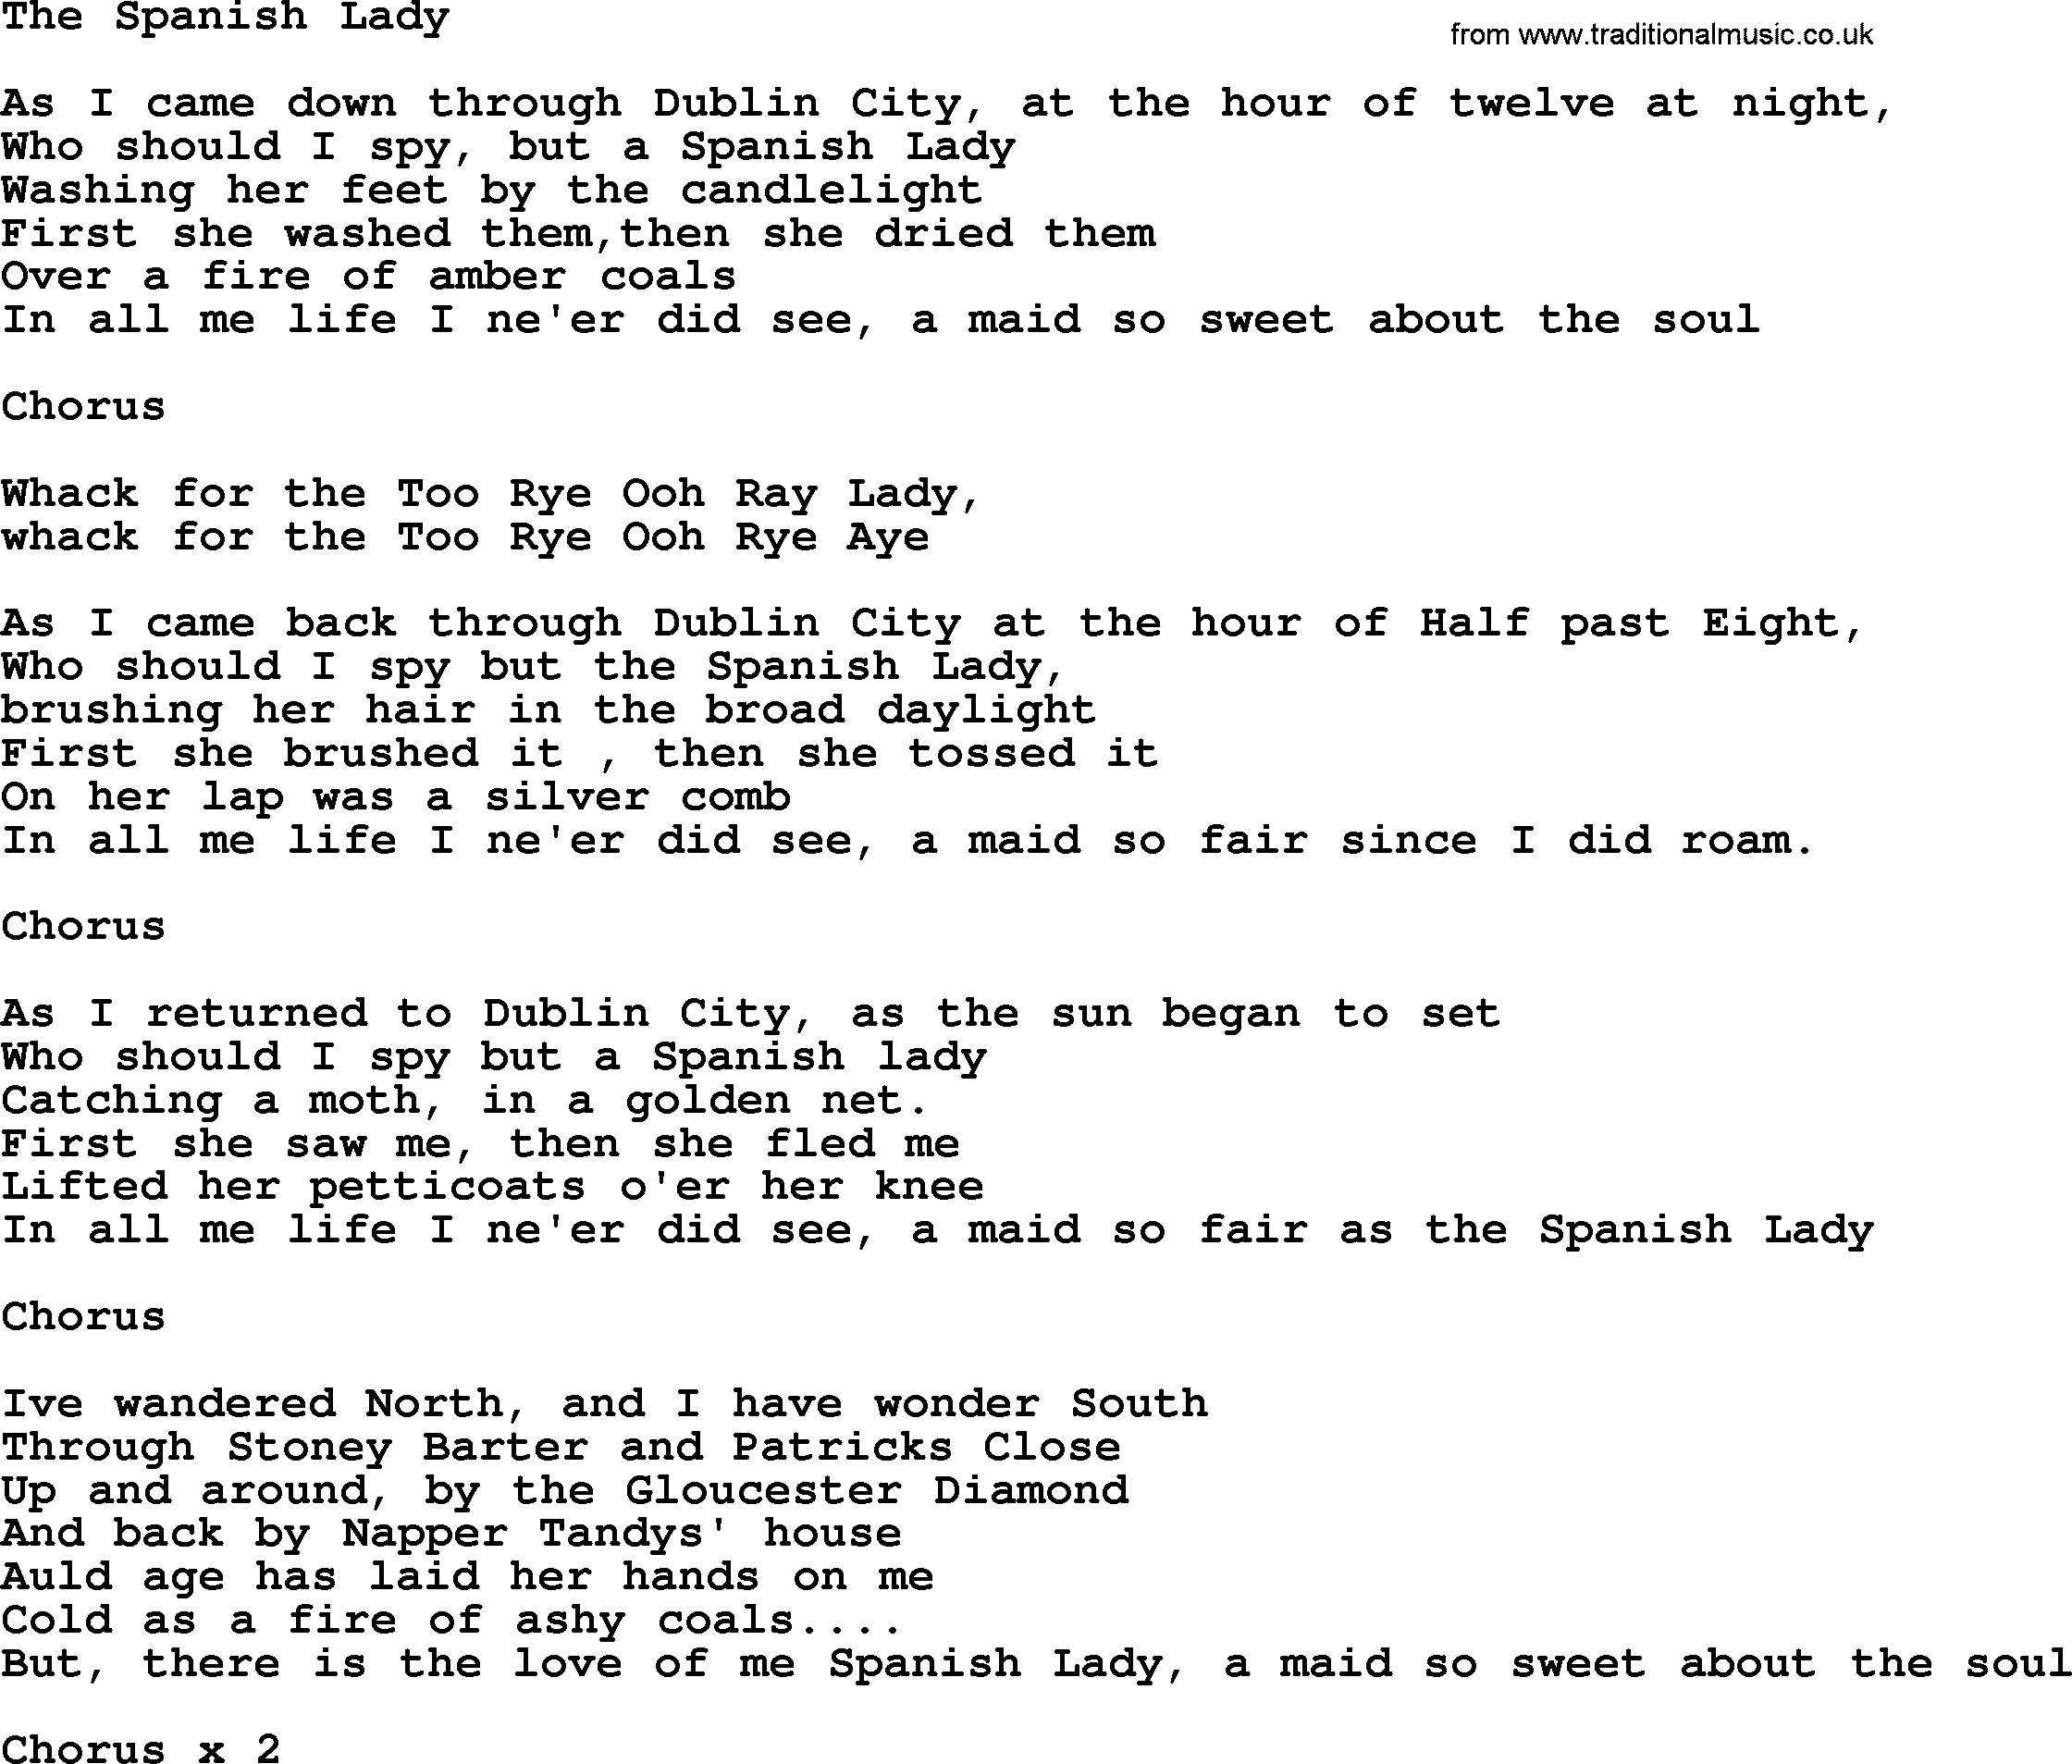 The Spanish Lady By The Dubliners Song Lyrics And Chords